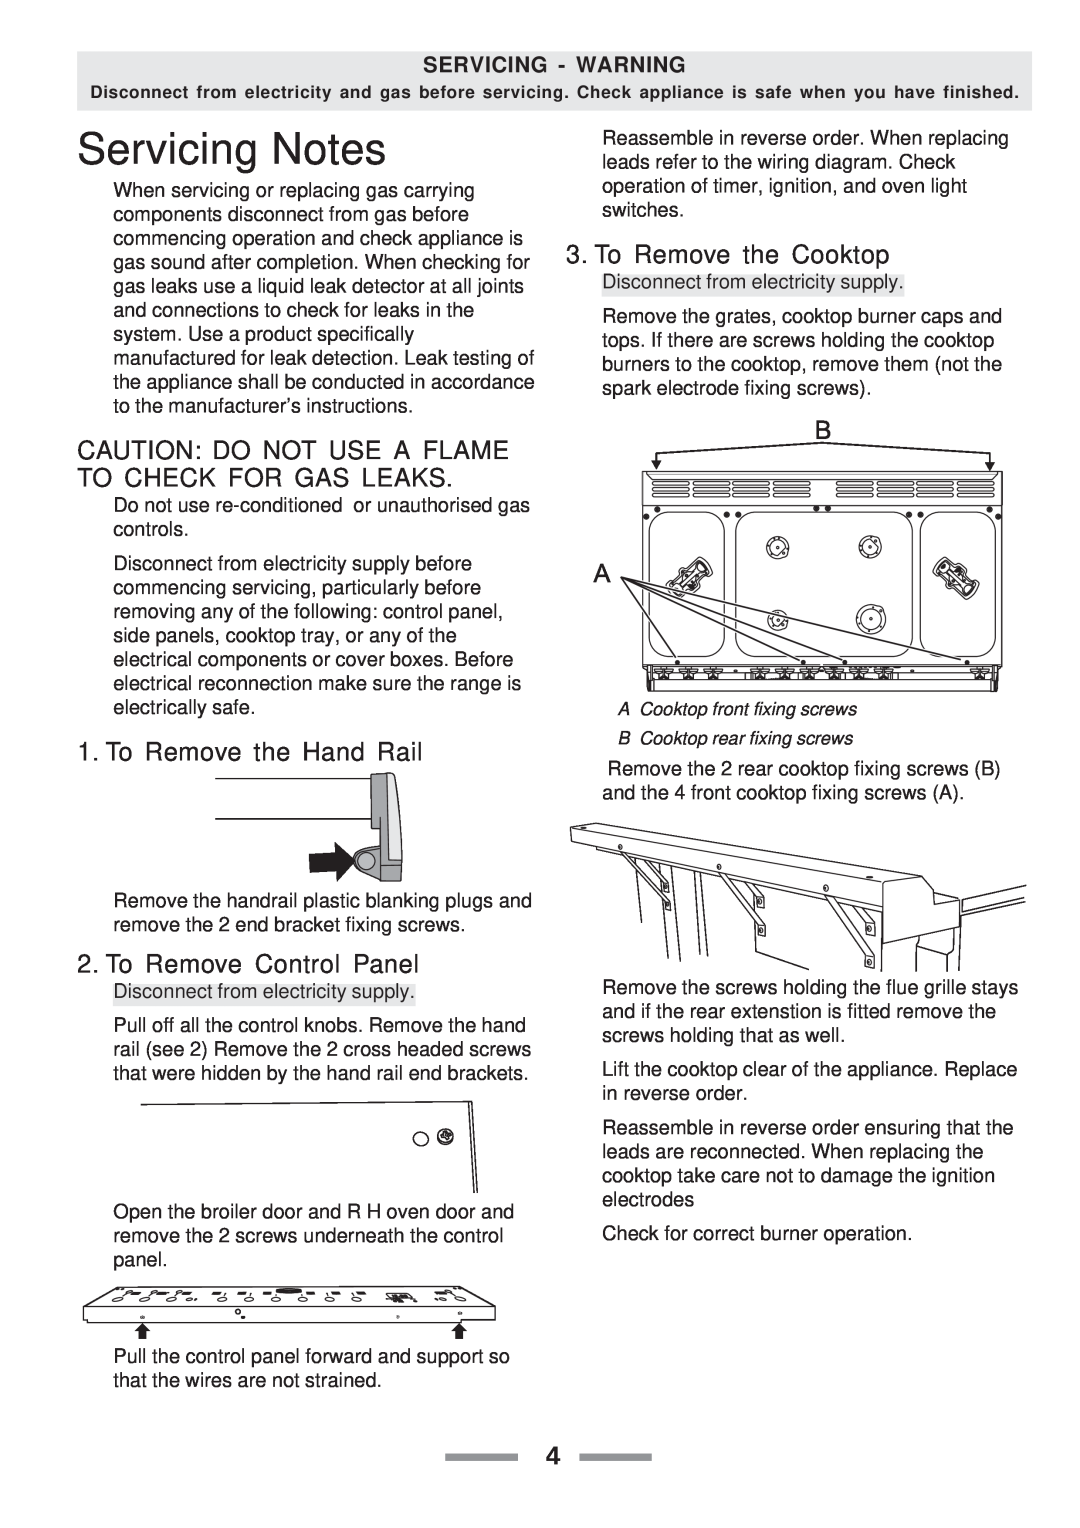 Aga Ranges F104010-01 manual Servicing Notes, To Remove the Cooktop, To Remove the Hand Rail, To Remove Control Panel 